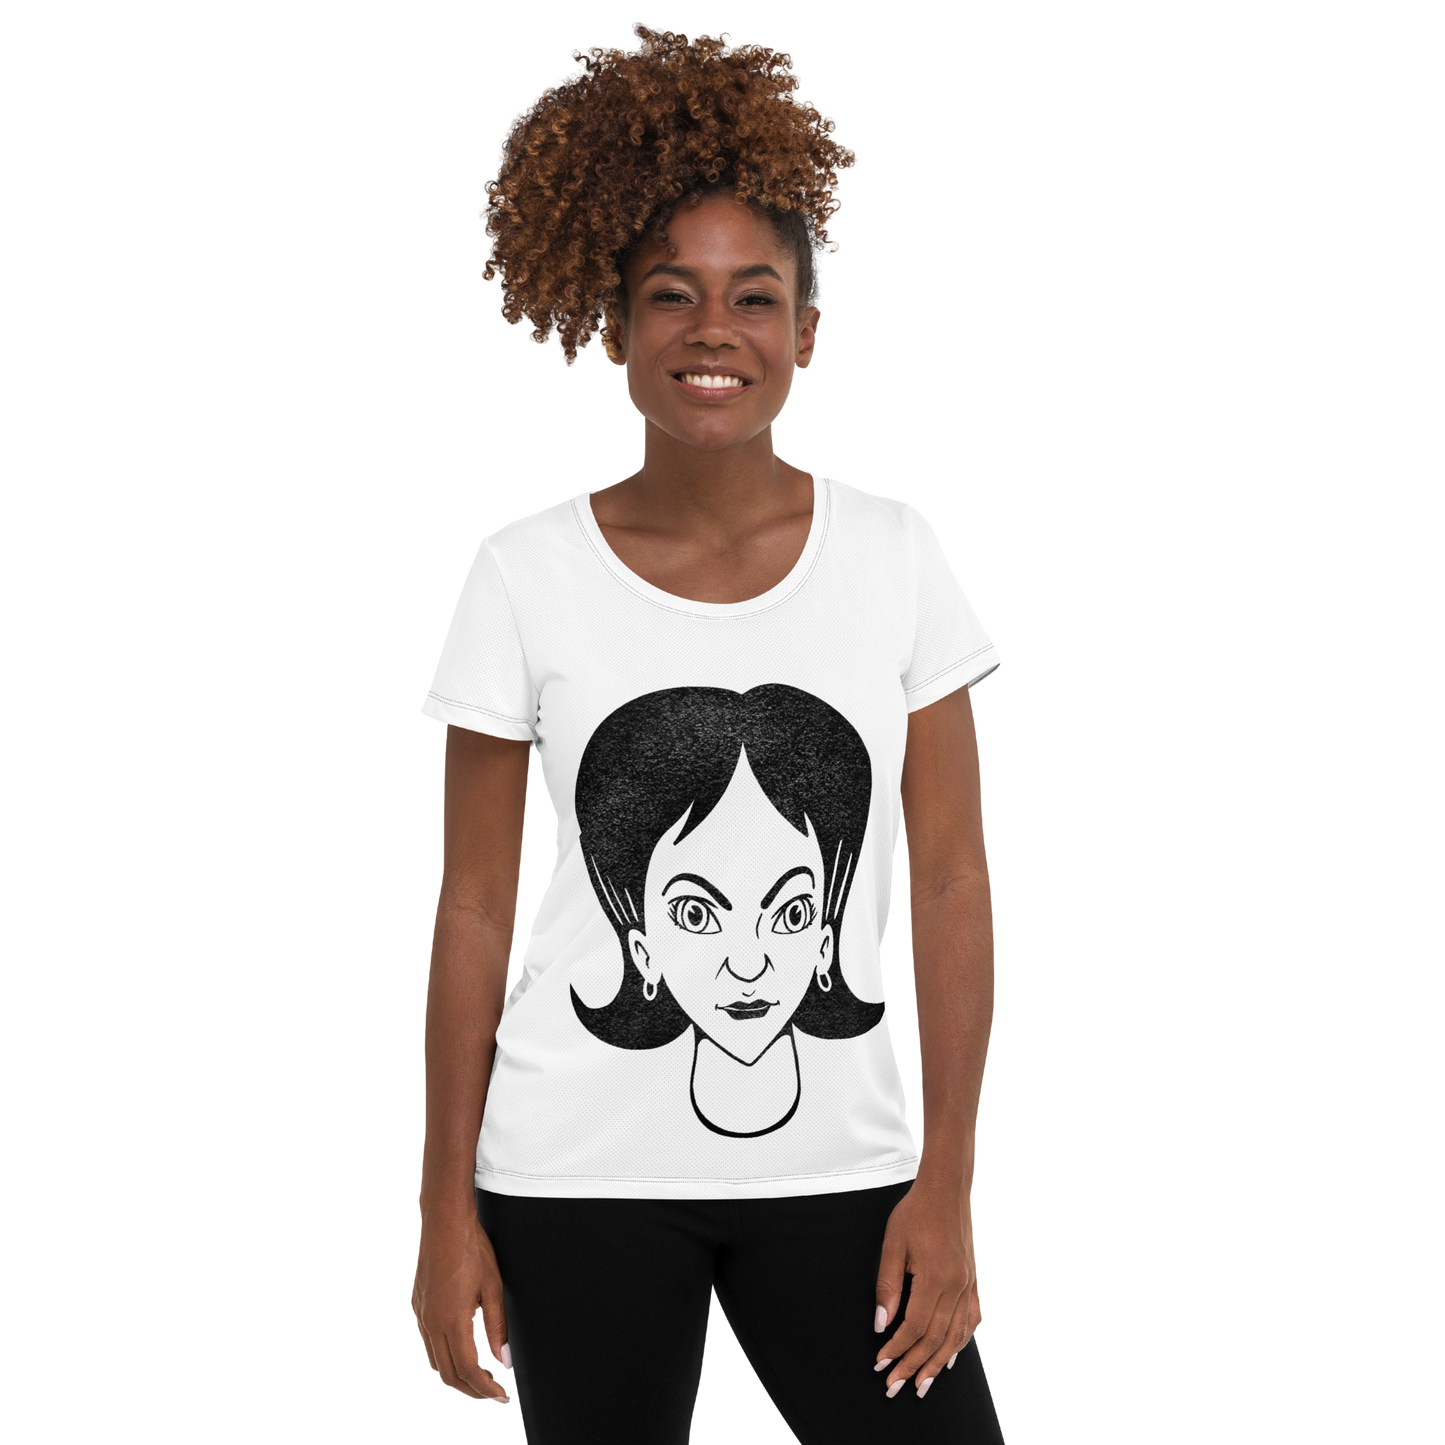 Delores All-Over Print Women's Athletic T-shirt